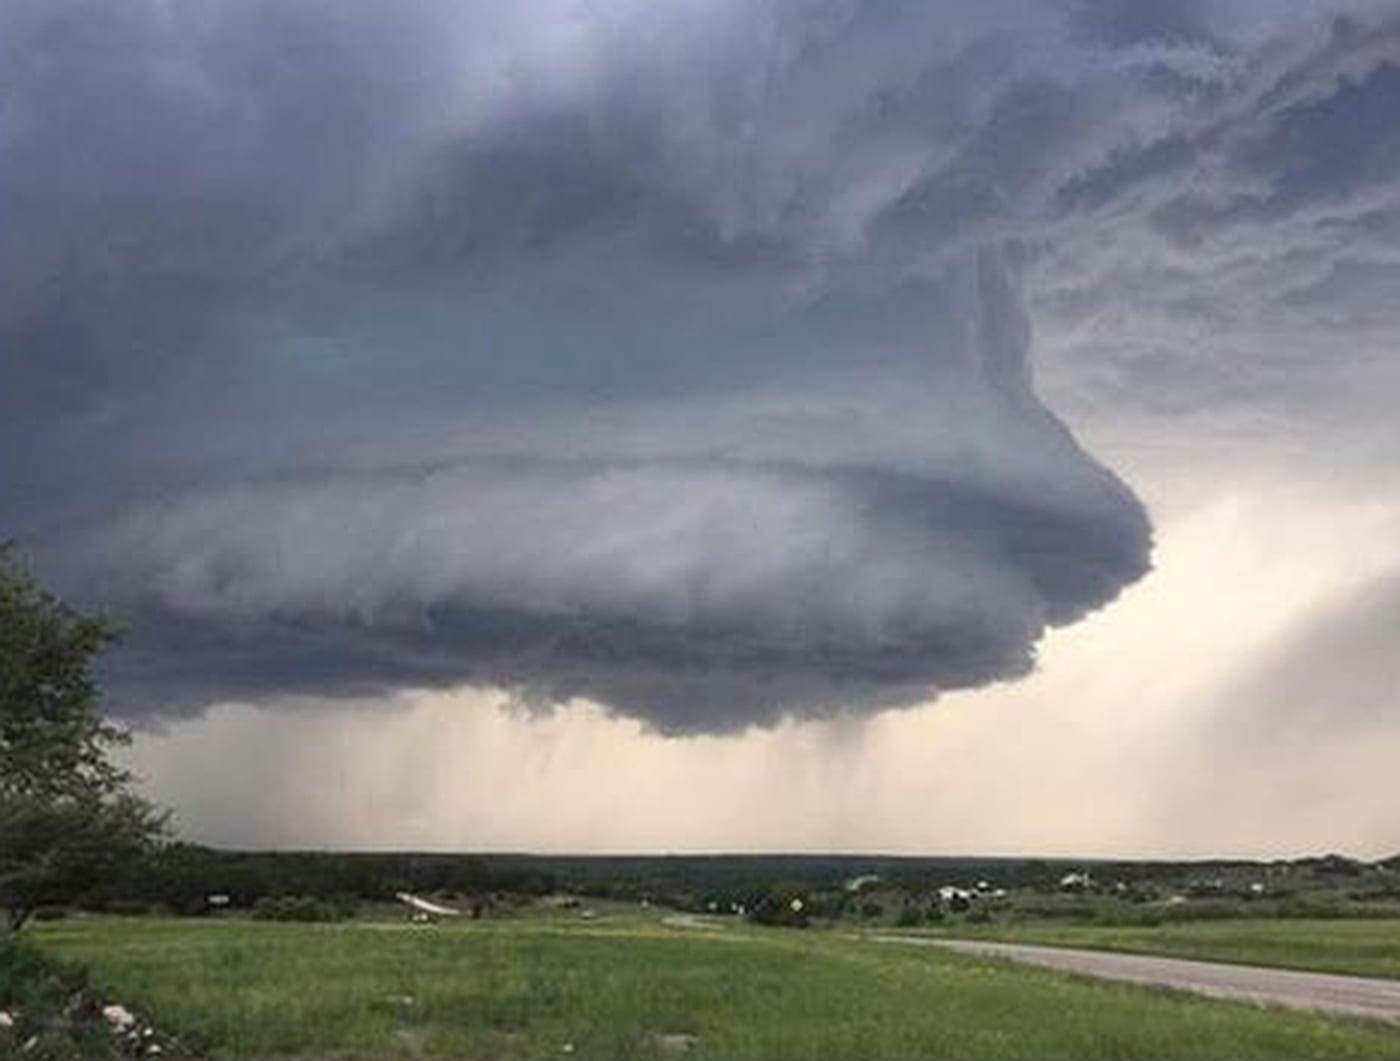 'Extremely Dangerous' Mile-Wide Tornado Roars Through North Texas - NBC News